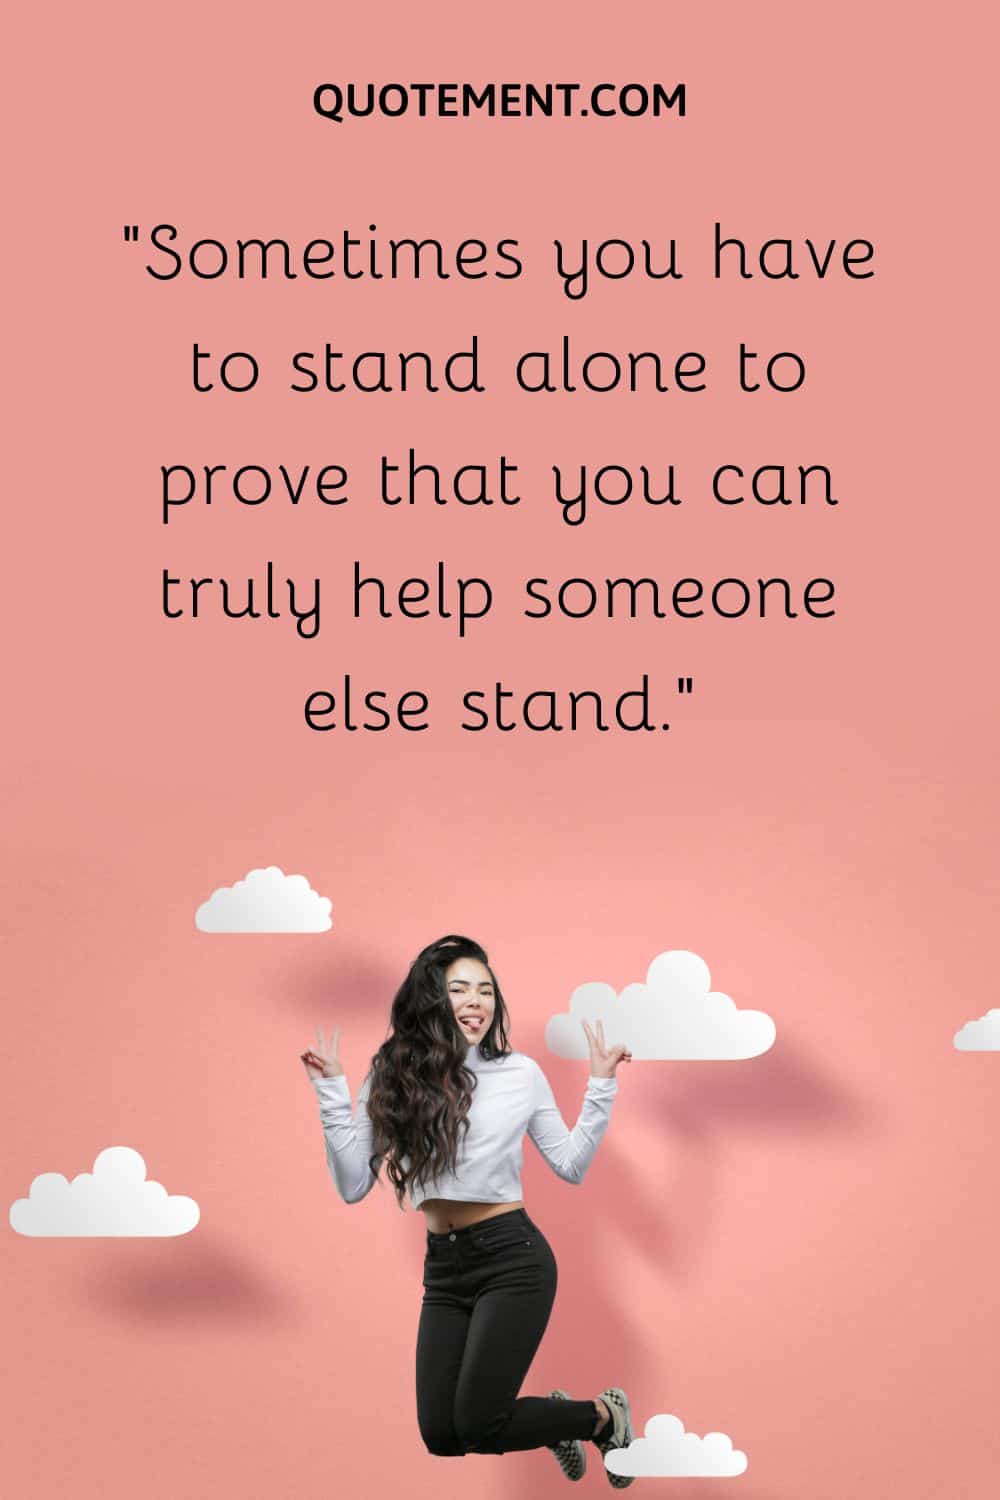 Sometimes you have to stand alone to prove that you can truly help someone else stand